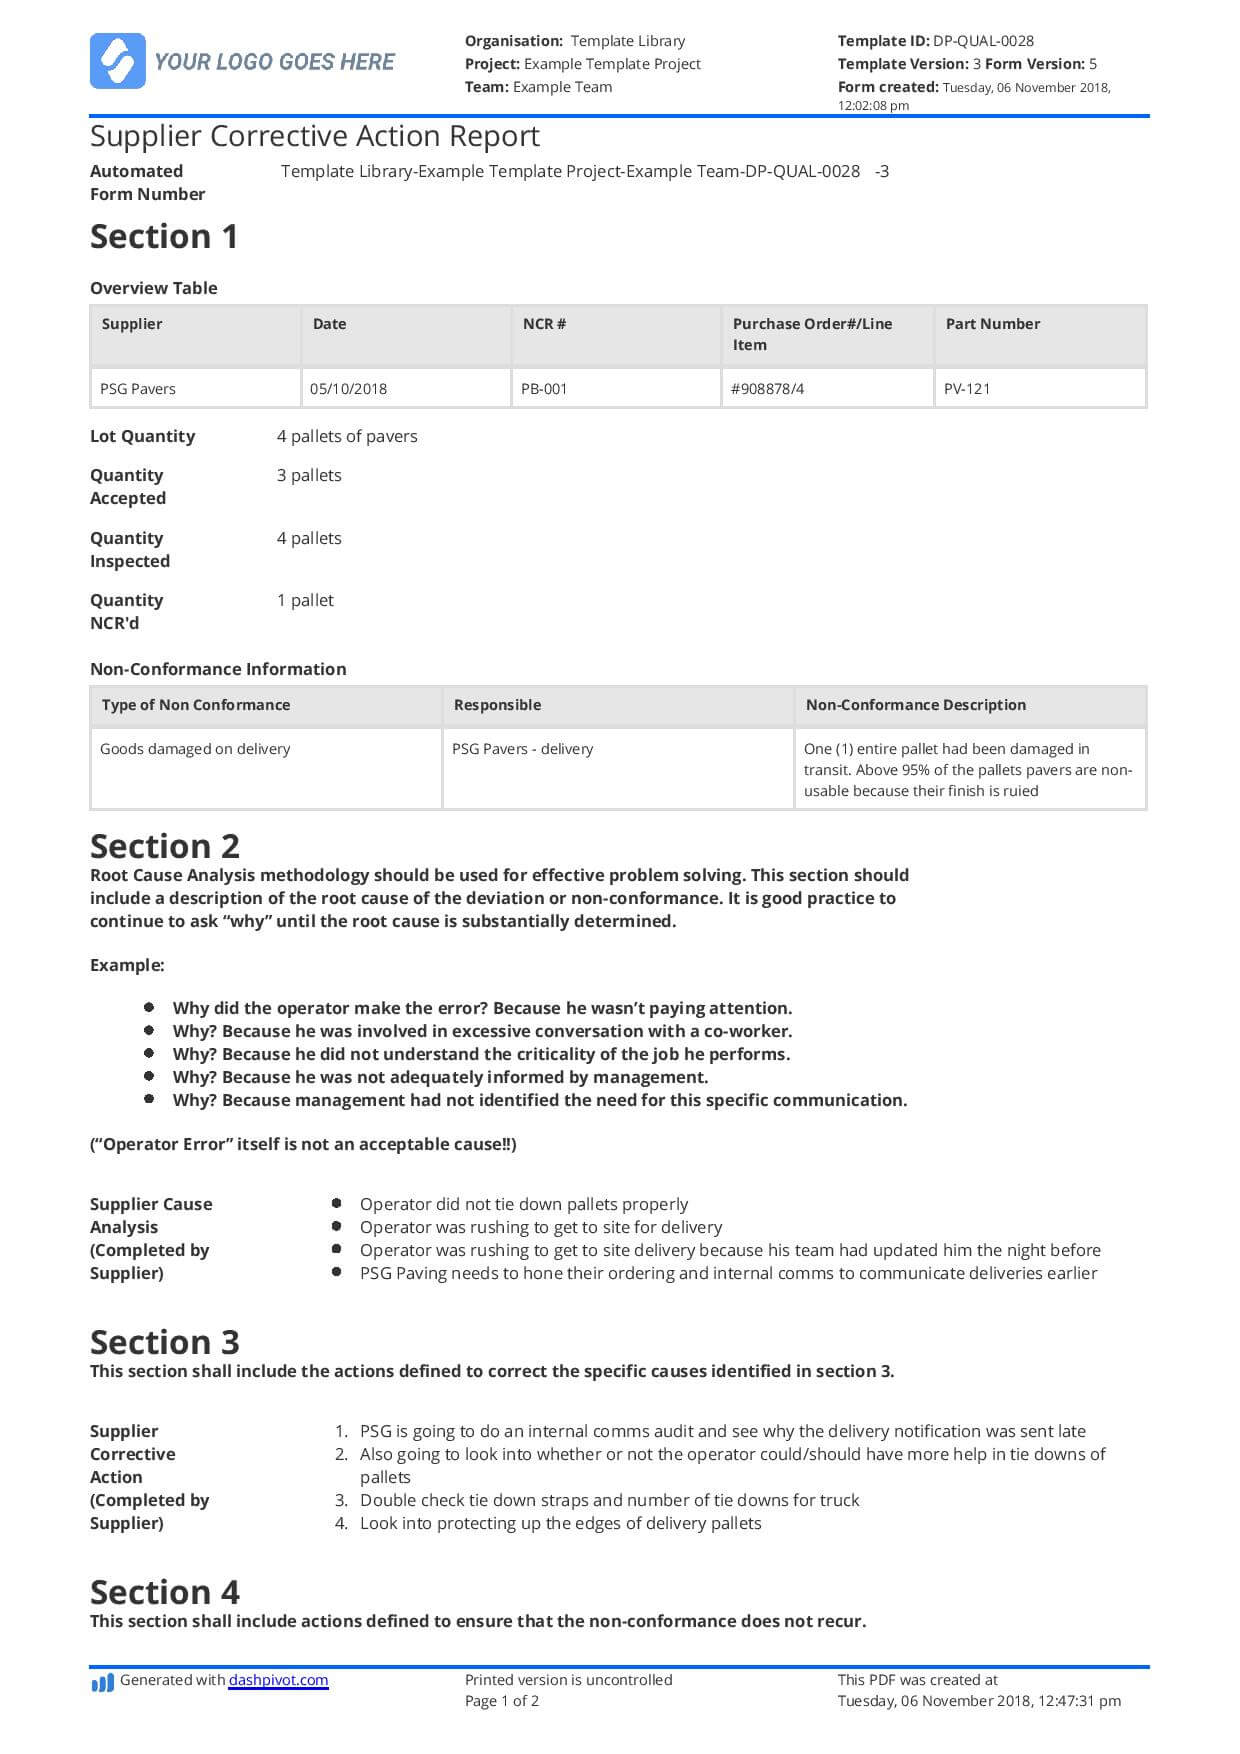 Supplier Corrective Action Report Template: Improve Your Throughout Check Out Report Template